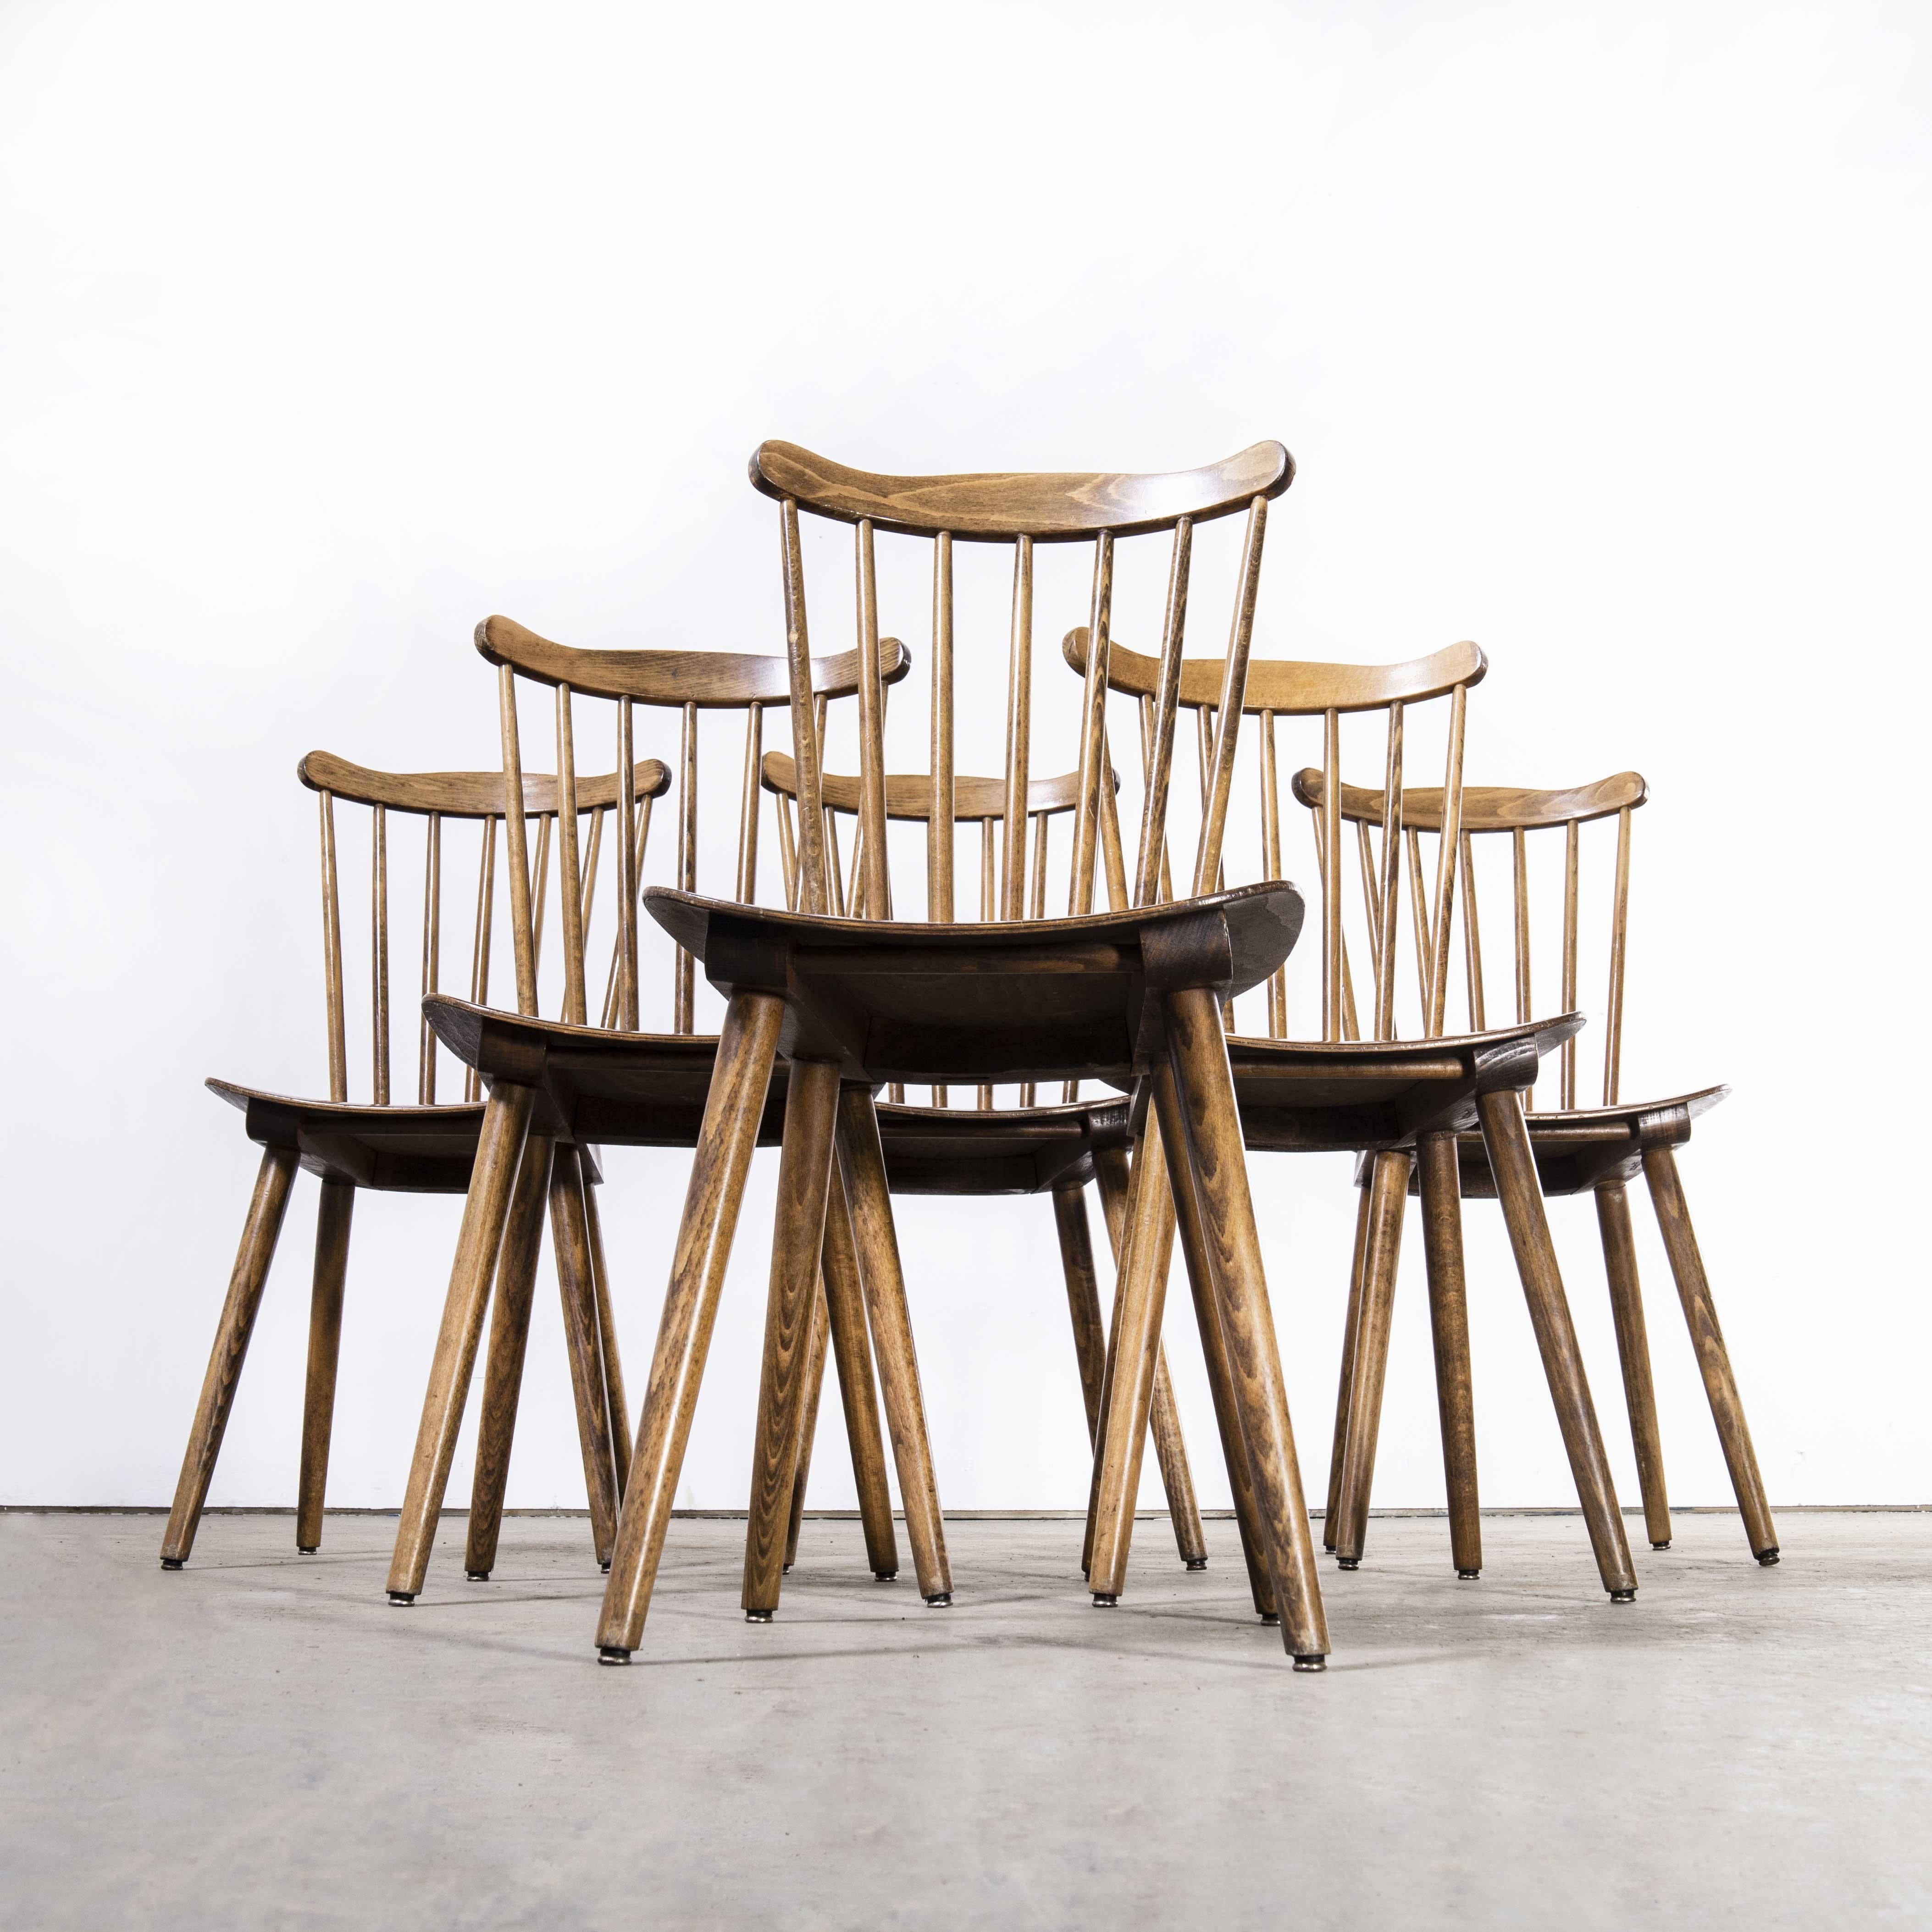 1950's French Baumann Menuet Dining Chair - Set Of Six For Sale 3